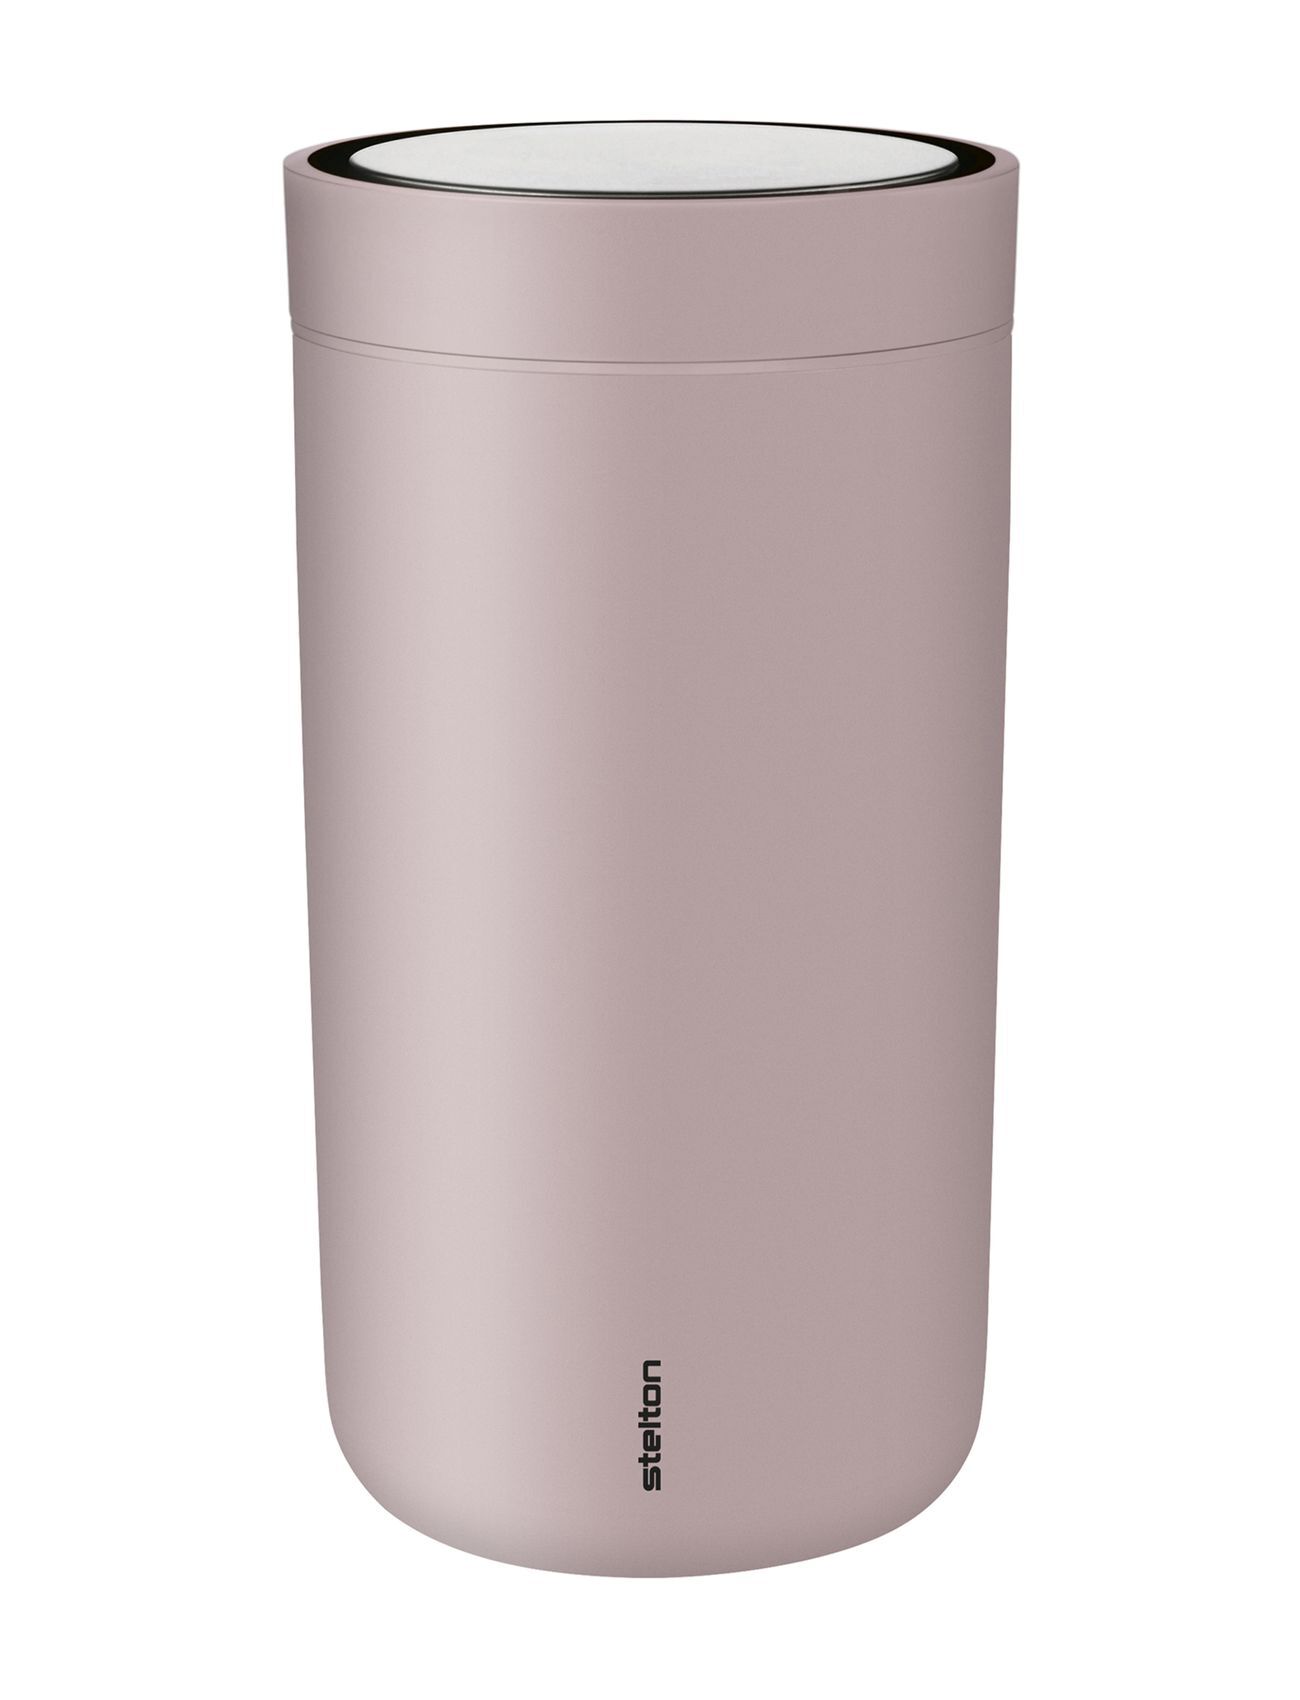 Stelton To-Go Click D. Steel, 0.2 L. Home Tableware Cups & Mugs Thermal Cups Rosa Stelton